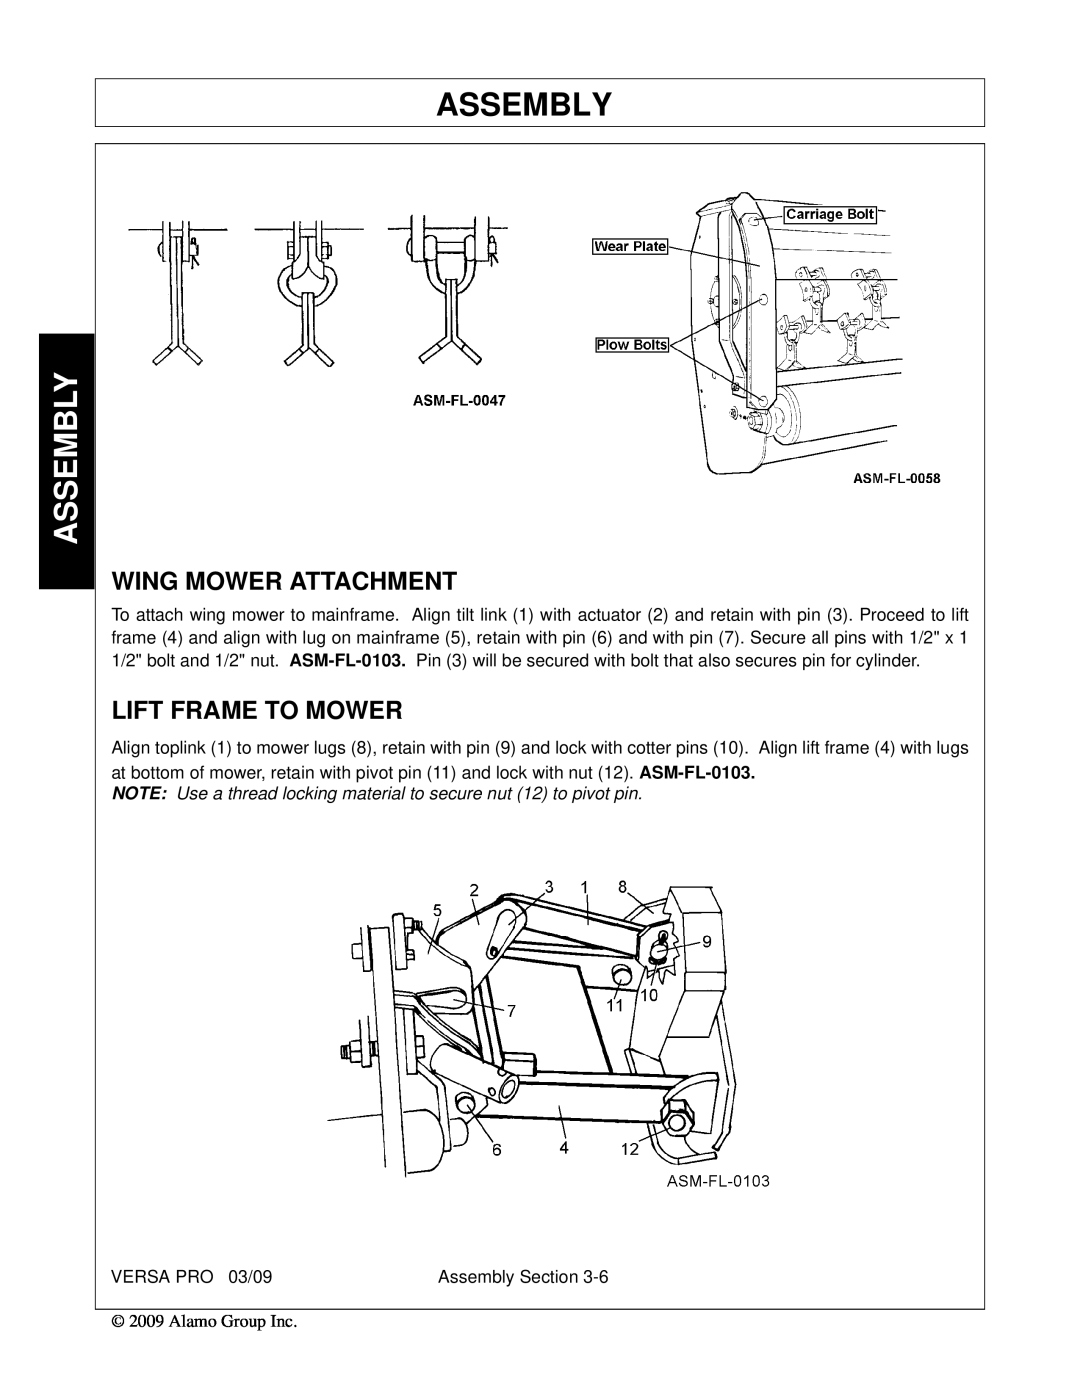 Alamo 803350C manual Wing Mower Attachment, Lift Frame To Mower, Assembly 